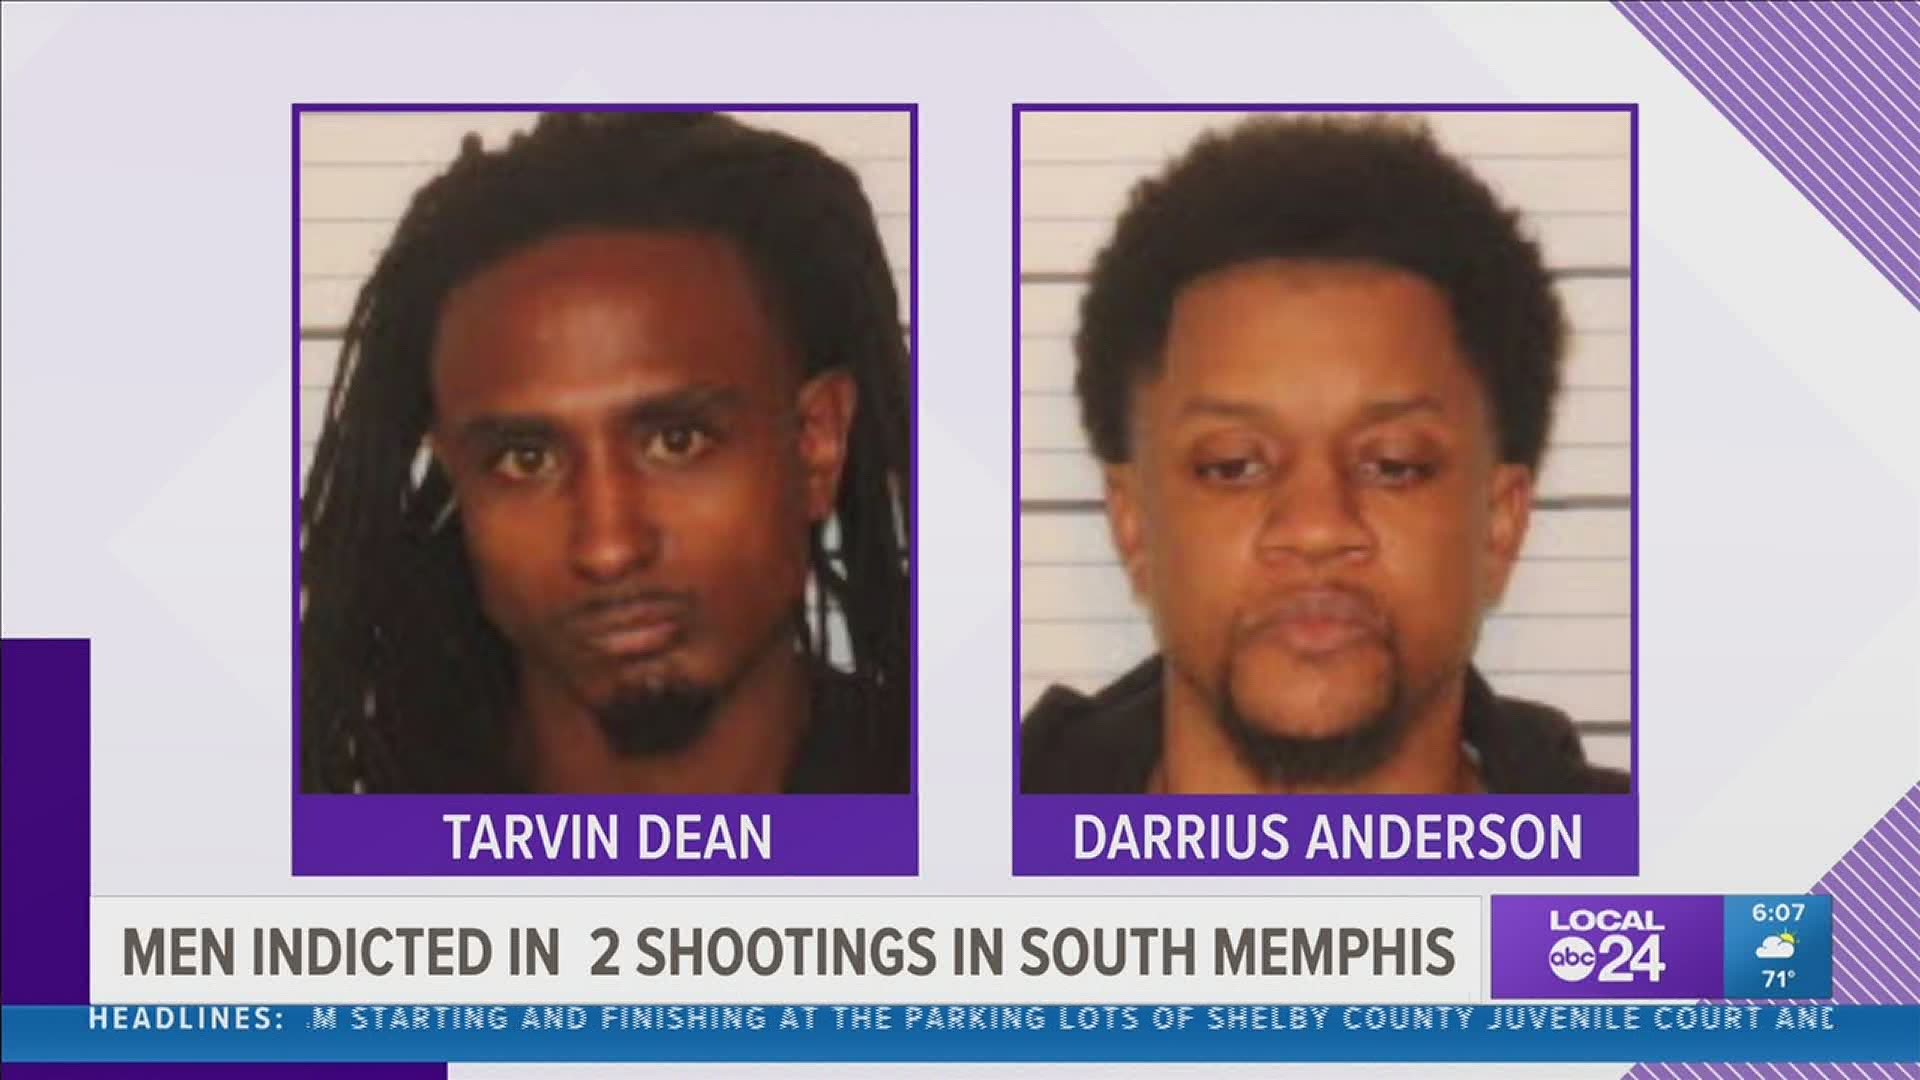 Tarvin Dean and Darrius Anderson are both indicted in the shootings that killed two people and injured three others.